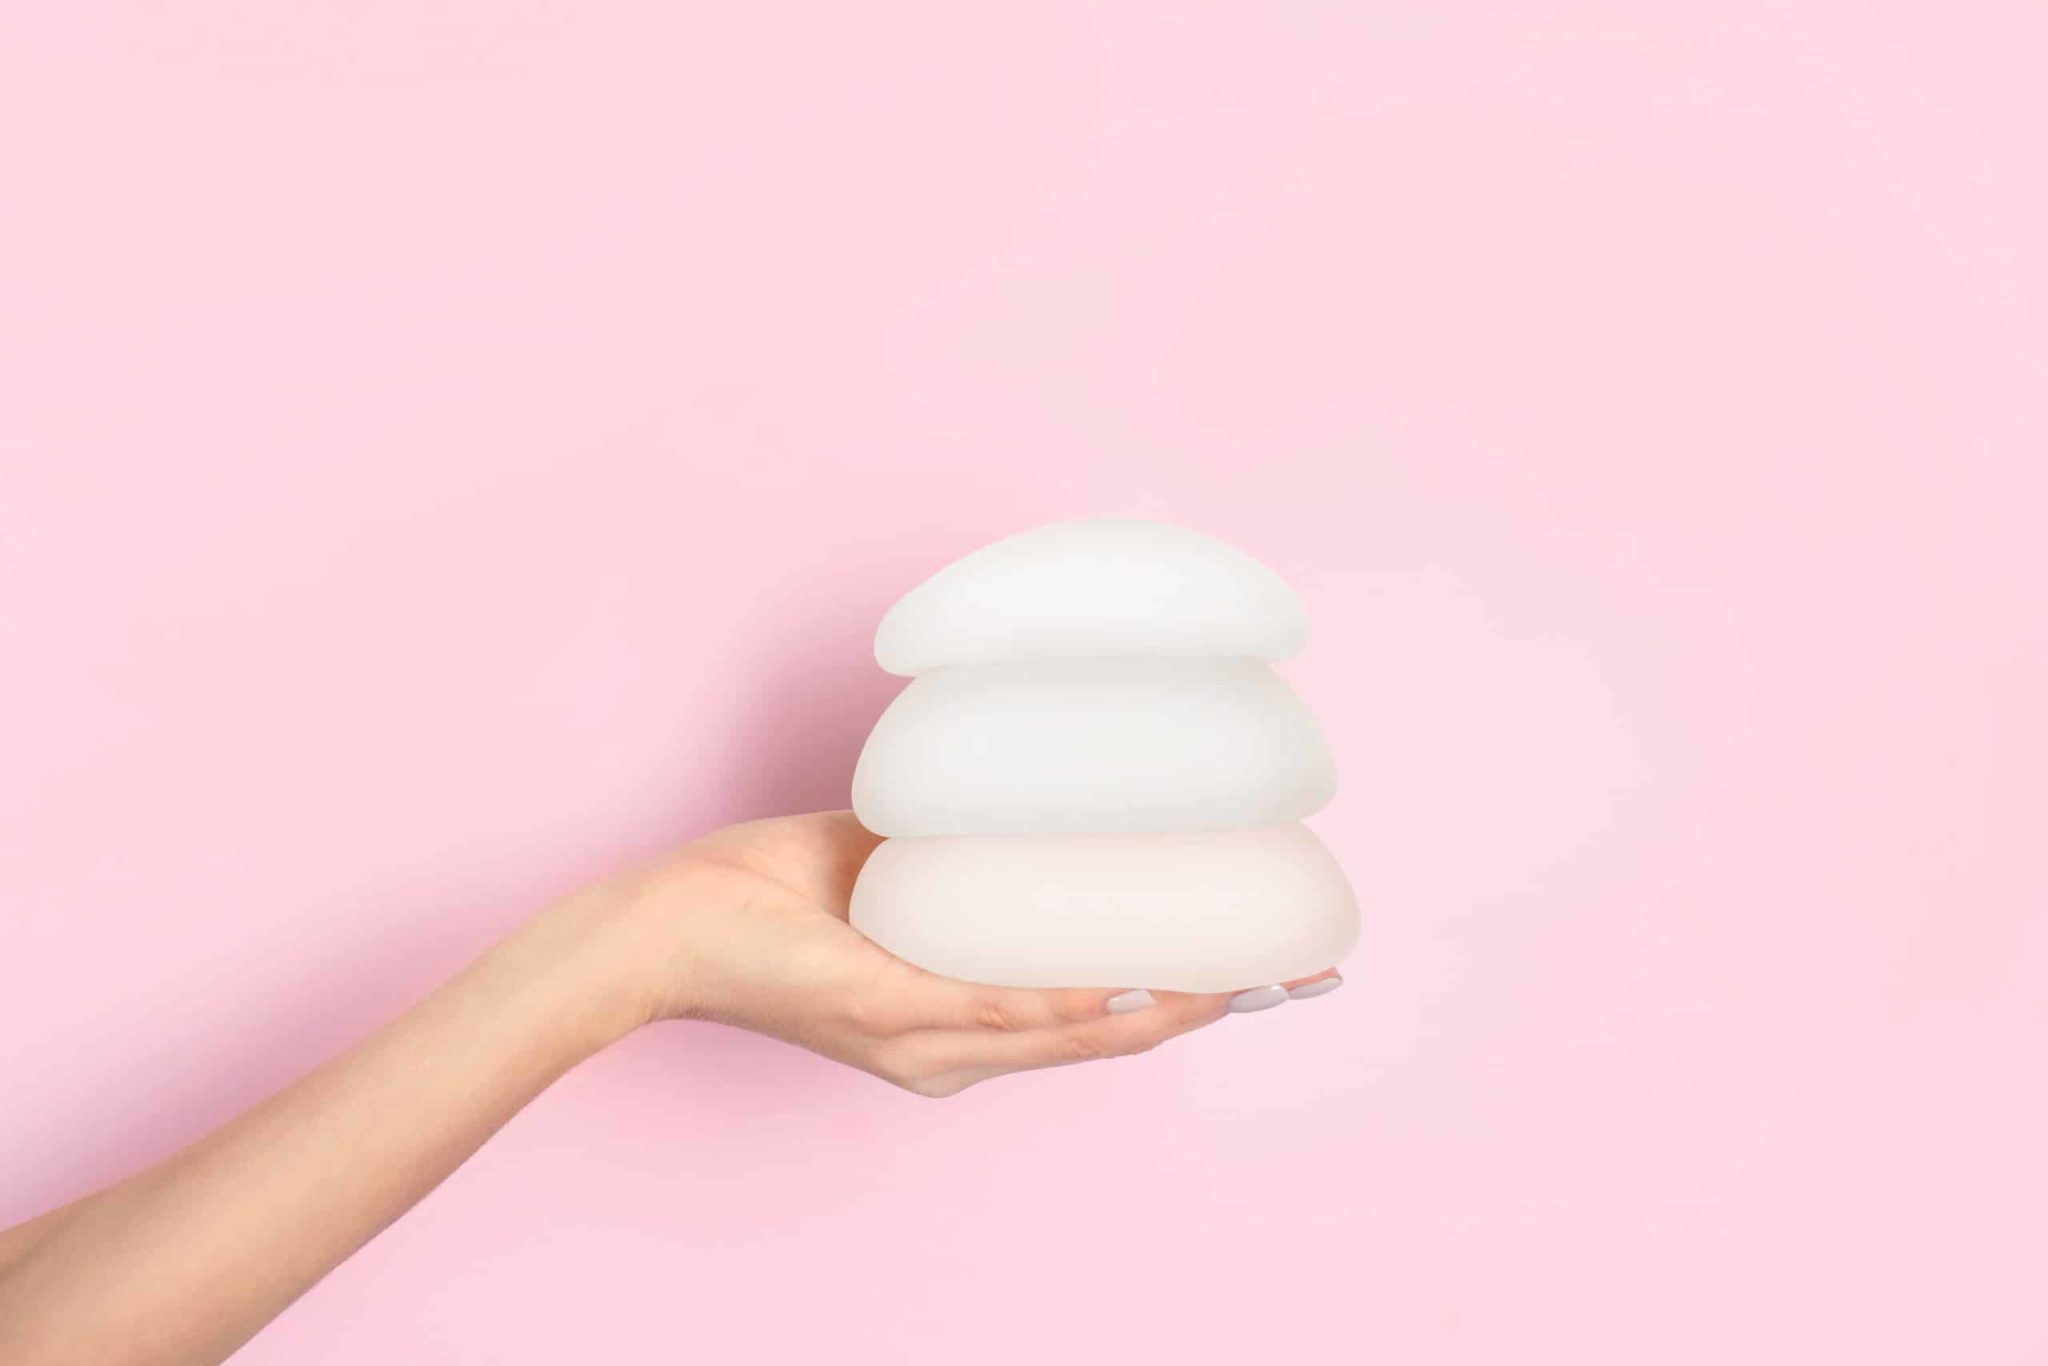 breast implant sizes, are breast implants safe